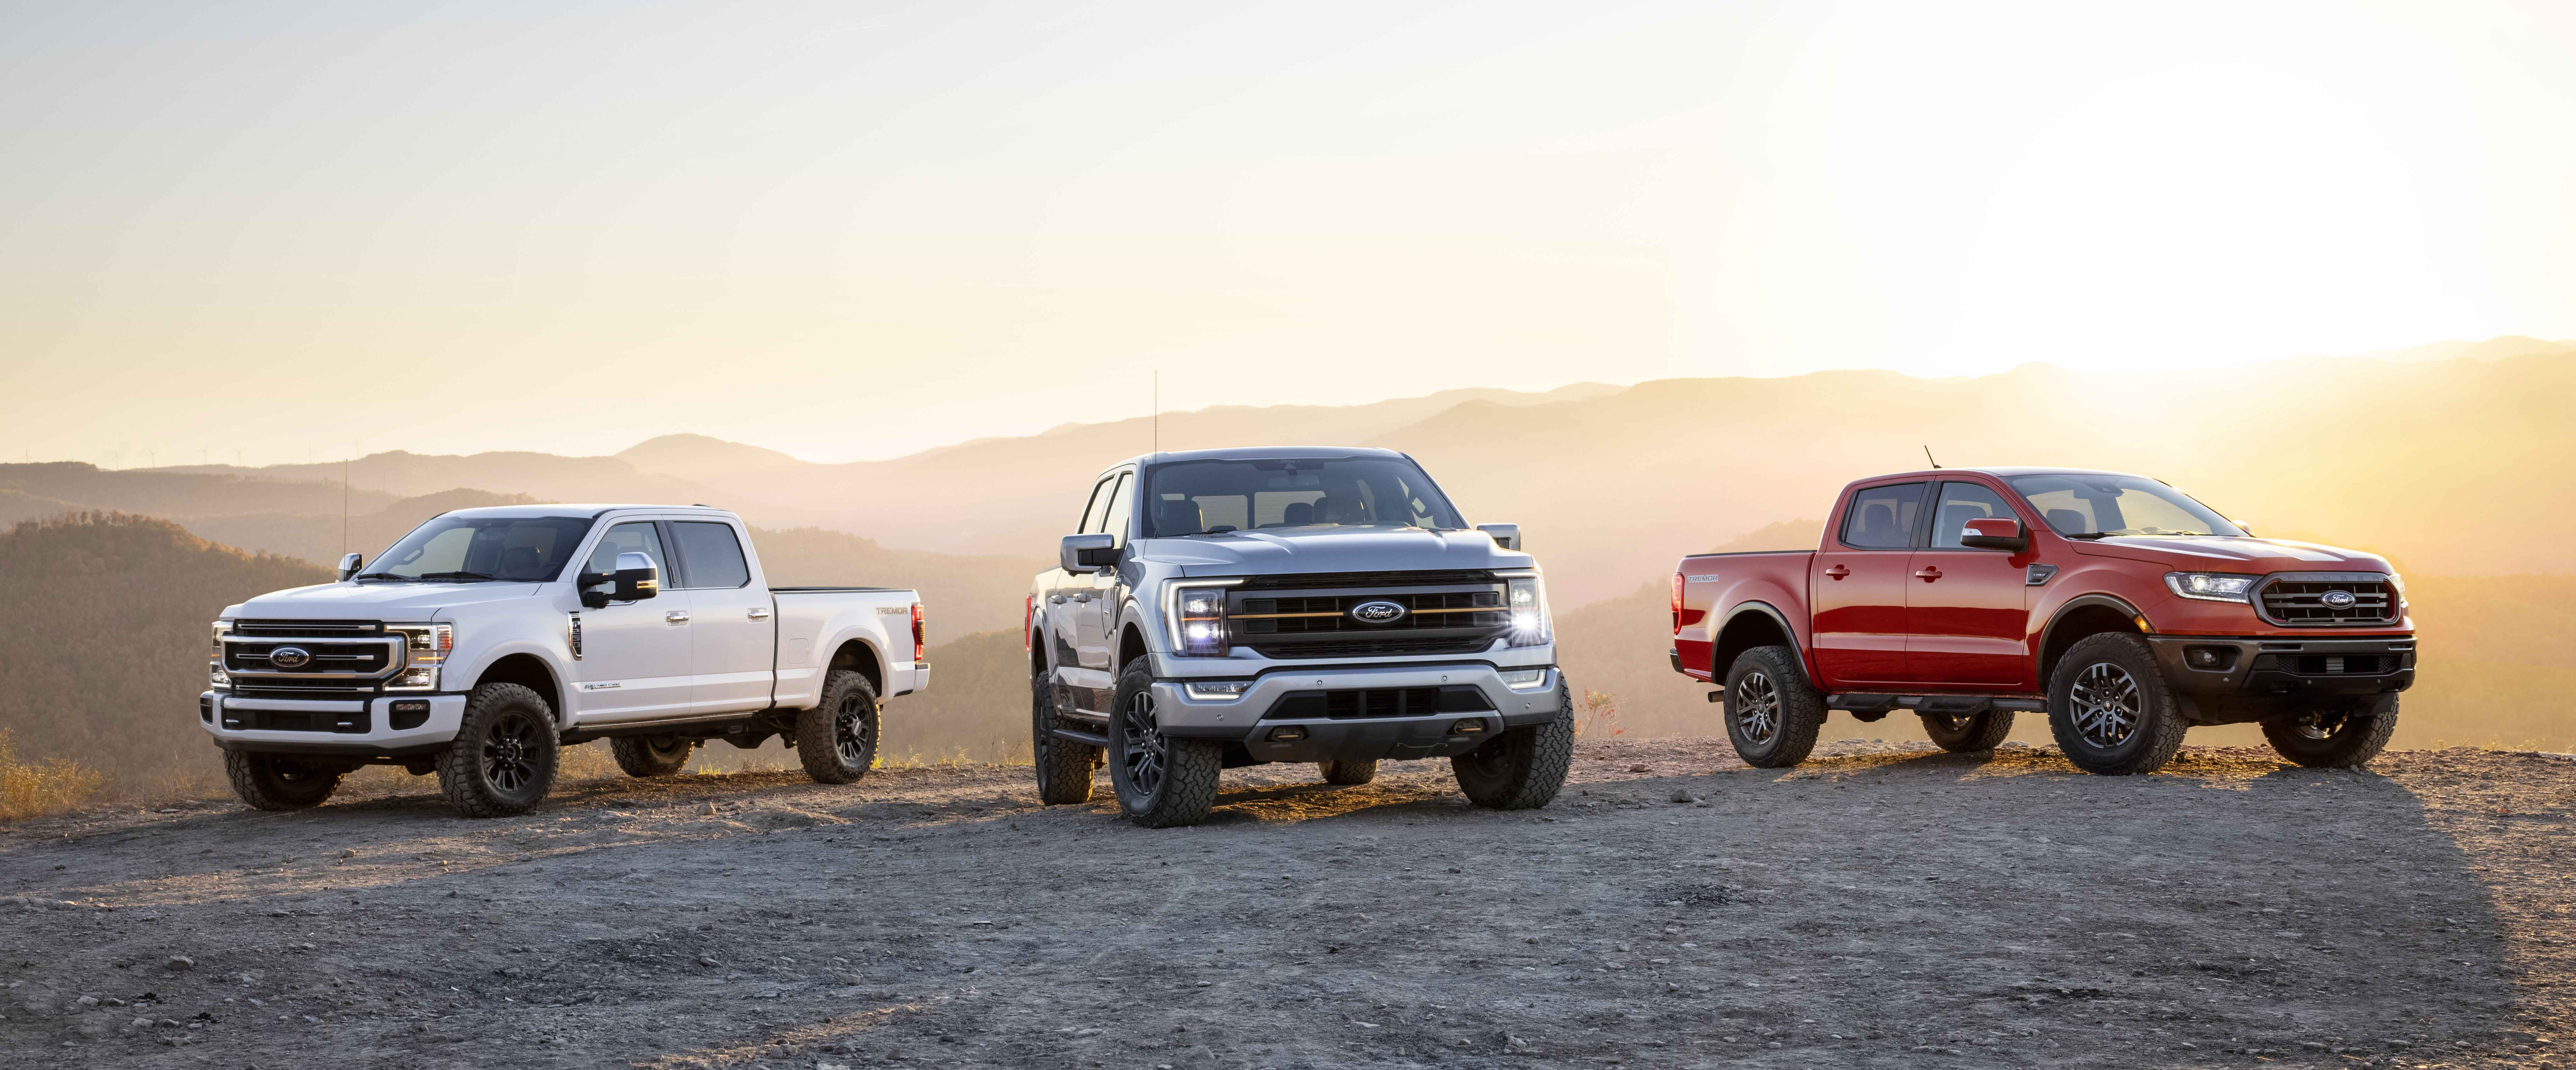 Ford Expands Off-Road Family of Trucks with All-New 2021  F-150 Tremor